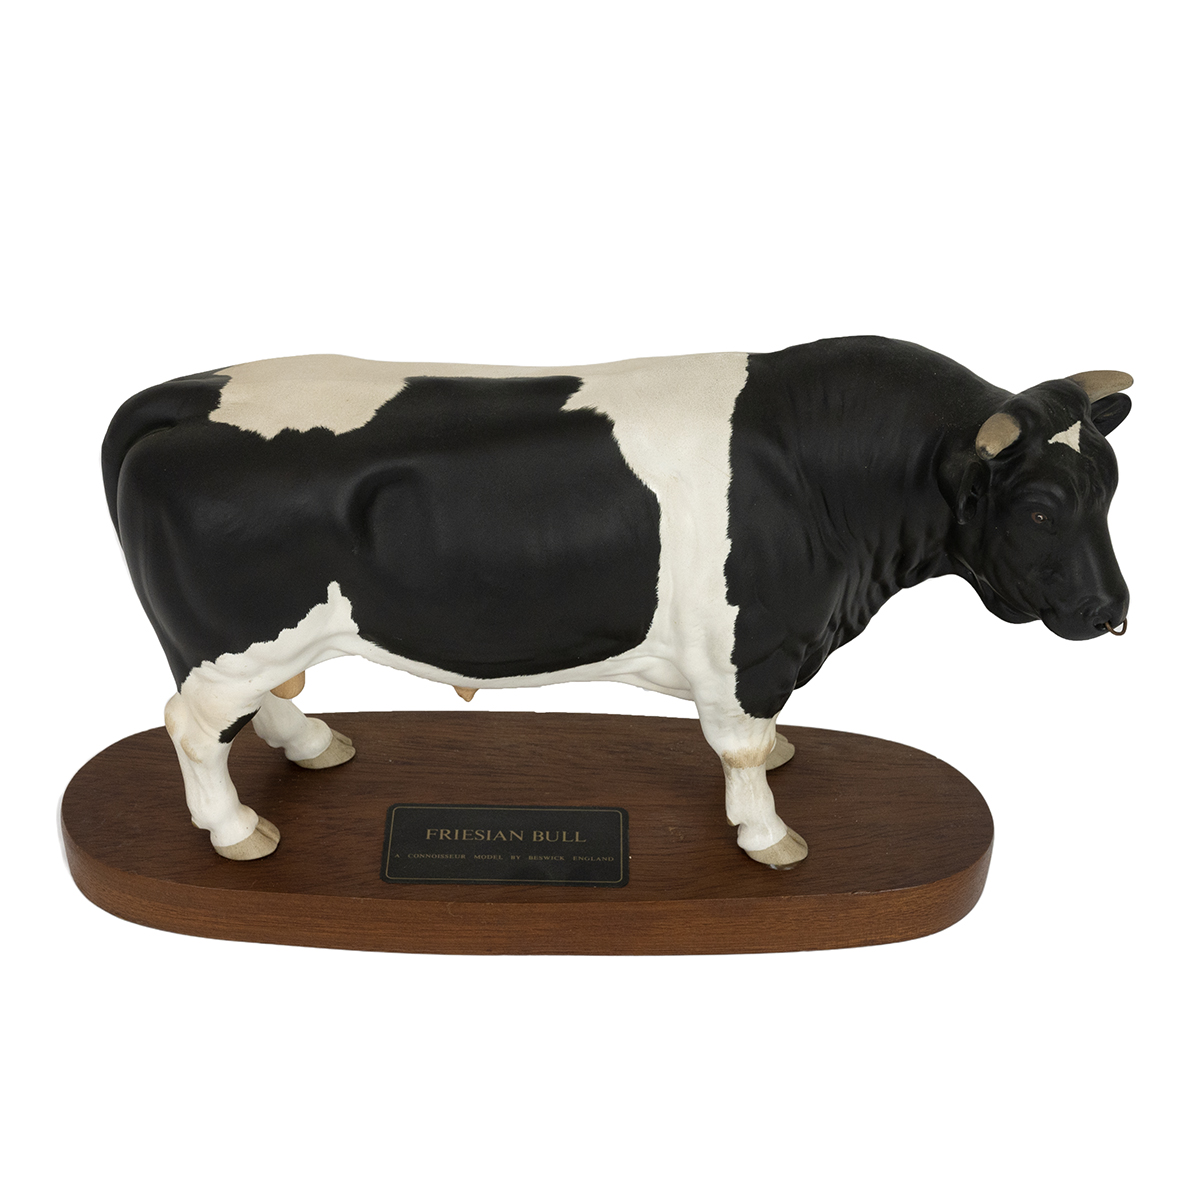 Beswick Connoisseur model of a Friesian Bull on wooden stand. Height (inc stand) 19cm, length 29cm.